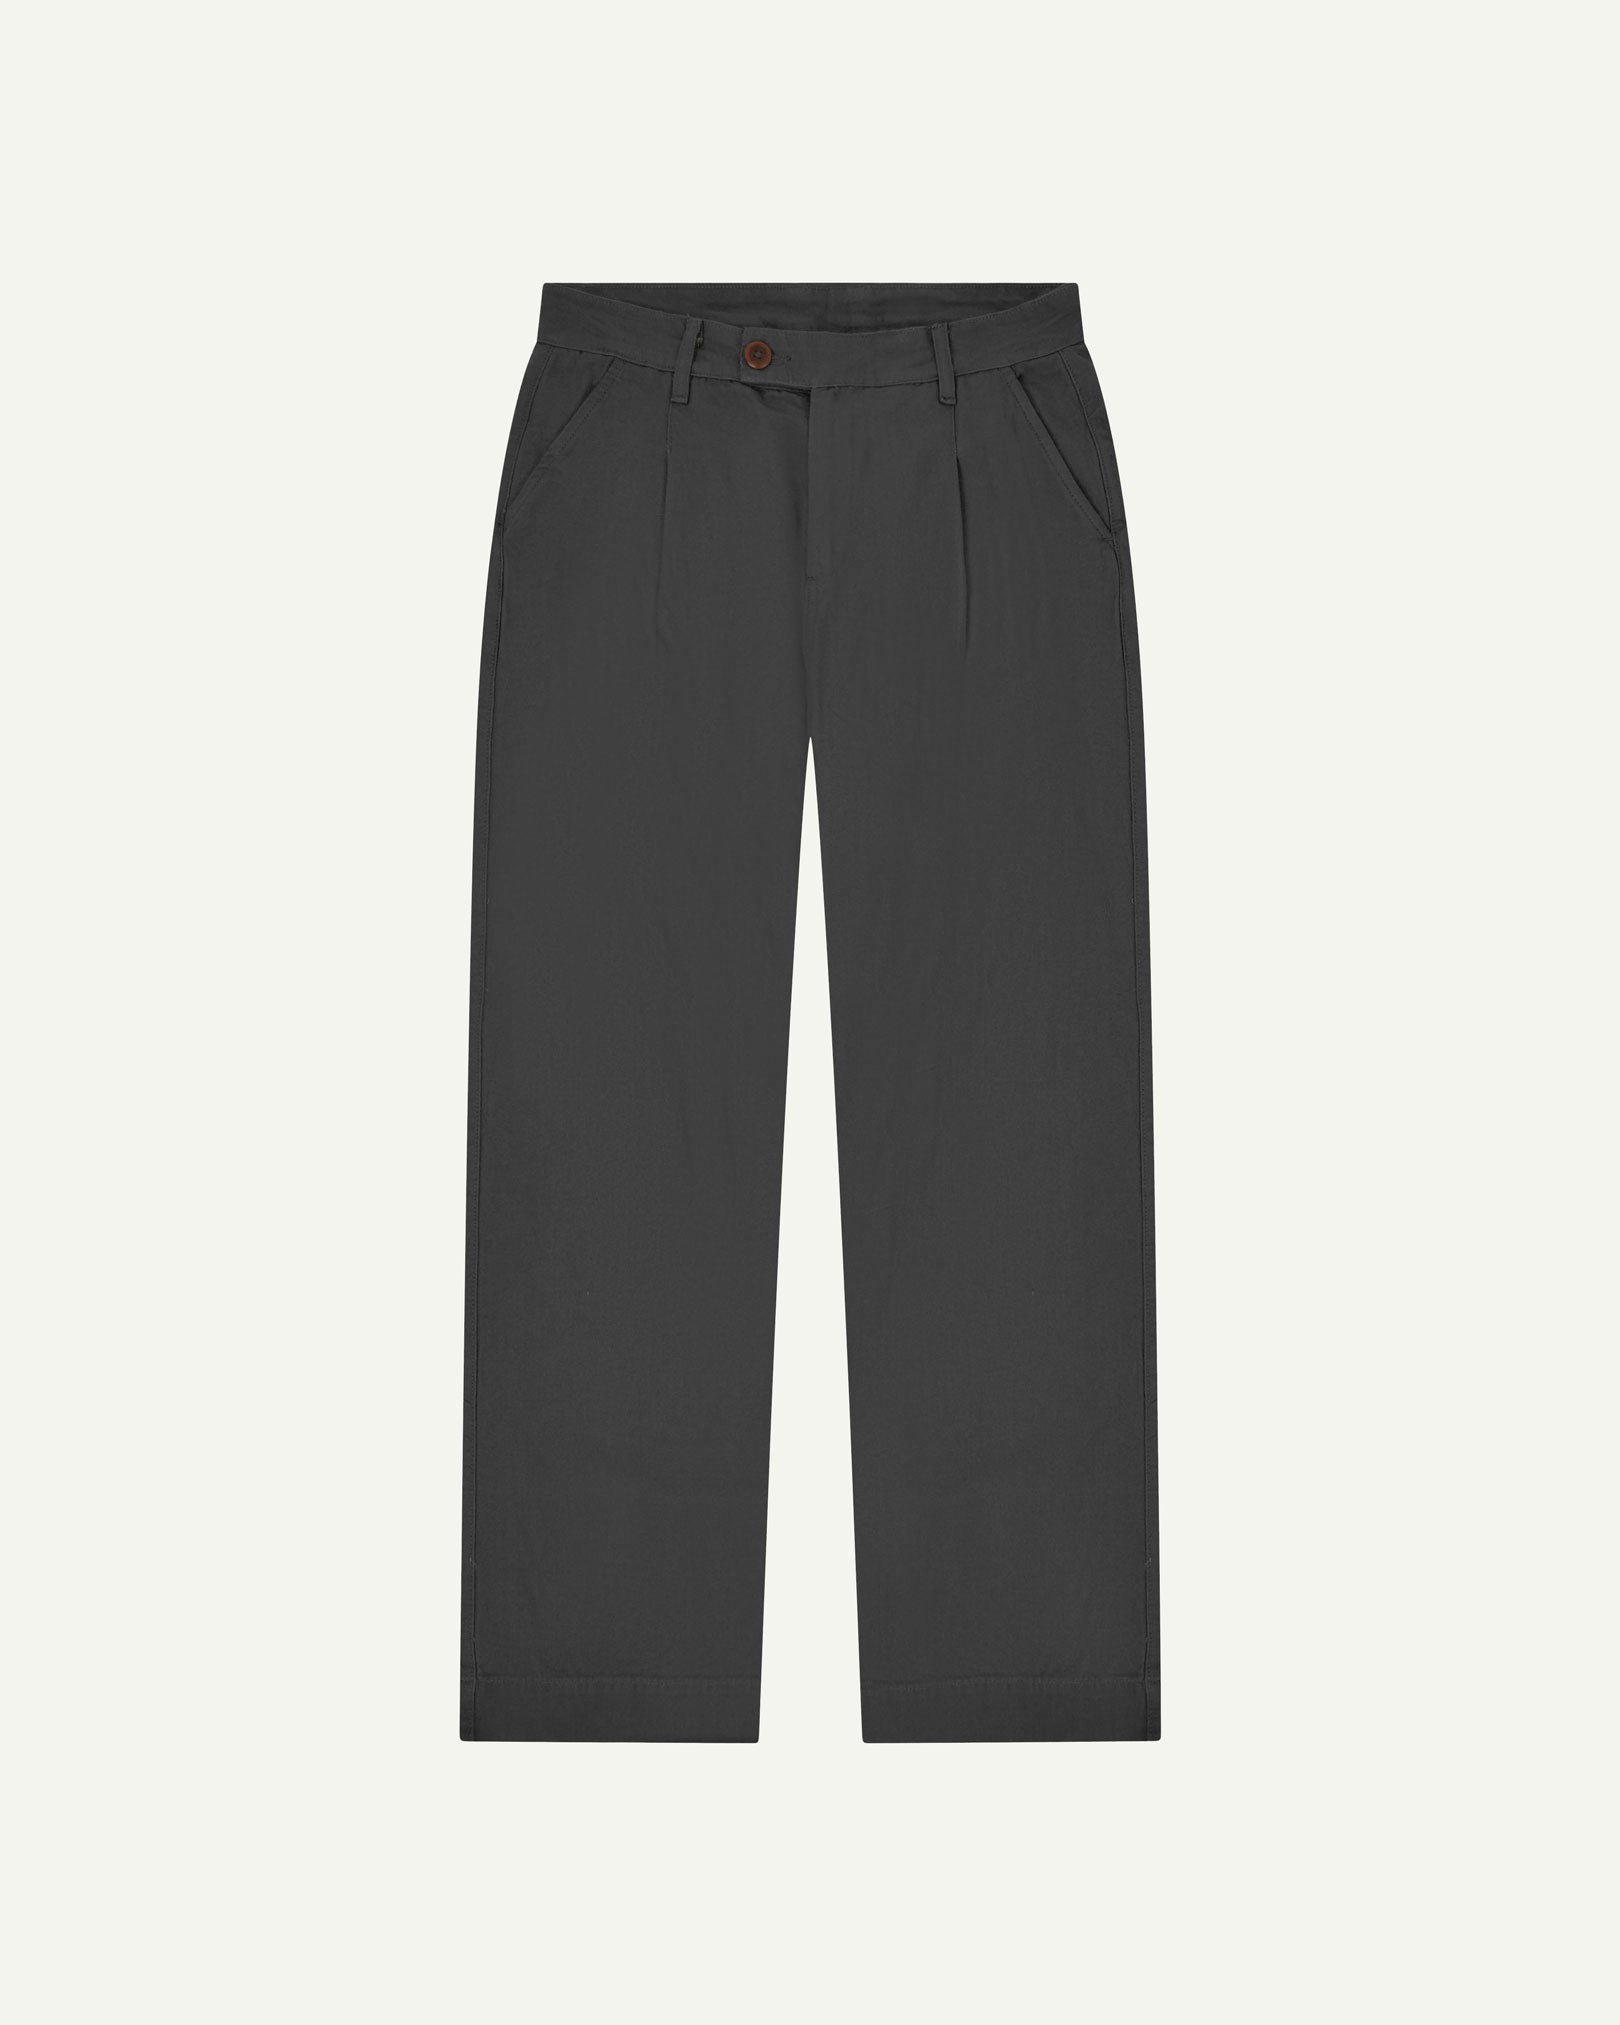 Front flat shot of 5018 Uskees men's organic mid-weight cotton boat trousers in charcoal grey showing contemporary wide leg style.